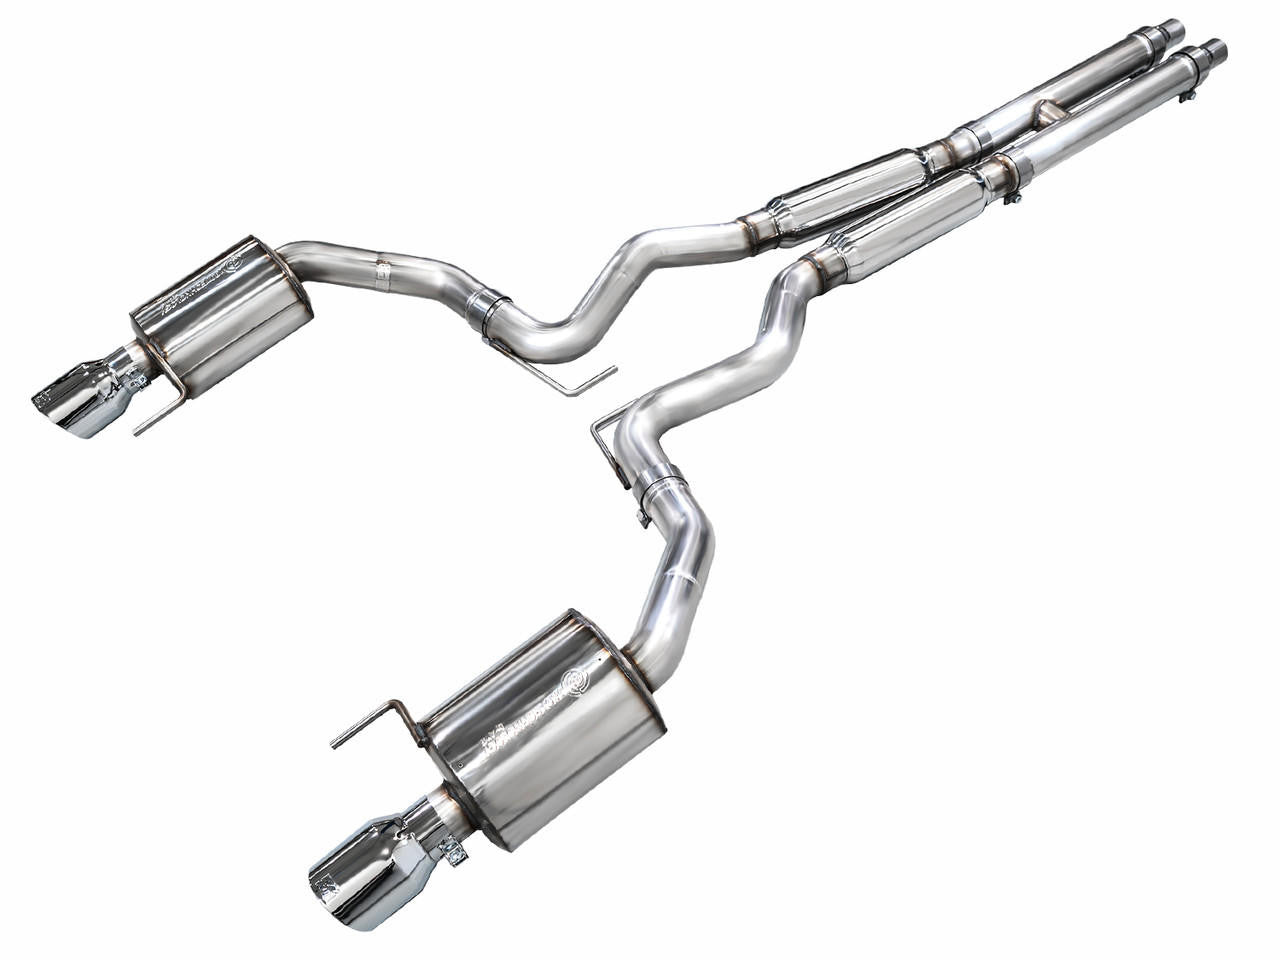 AWE Tuning AWE Touring Edition Exhaust for S650 Mustang GT Fastback - Dual Chrome Silver Tips 3015-32650 